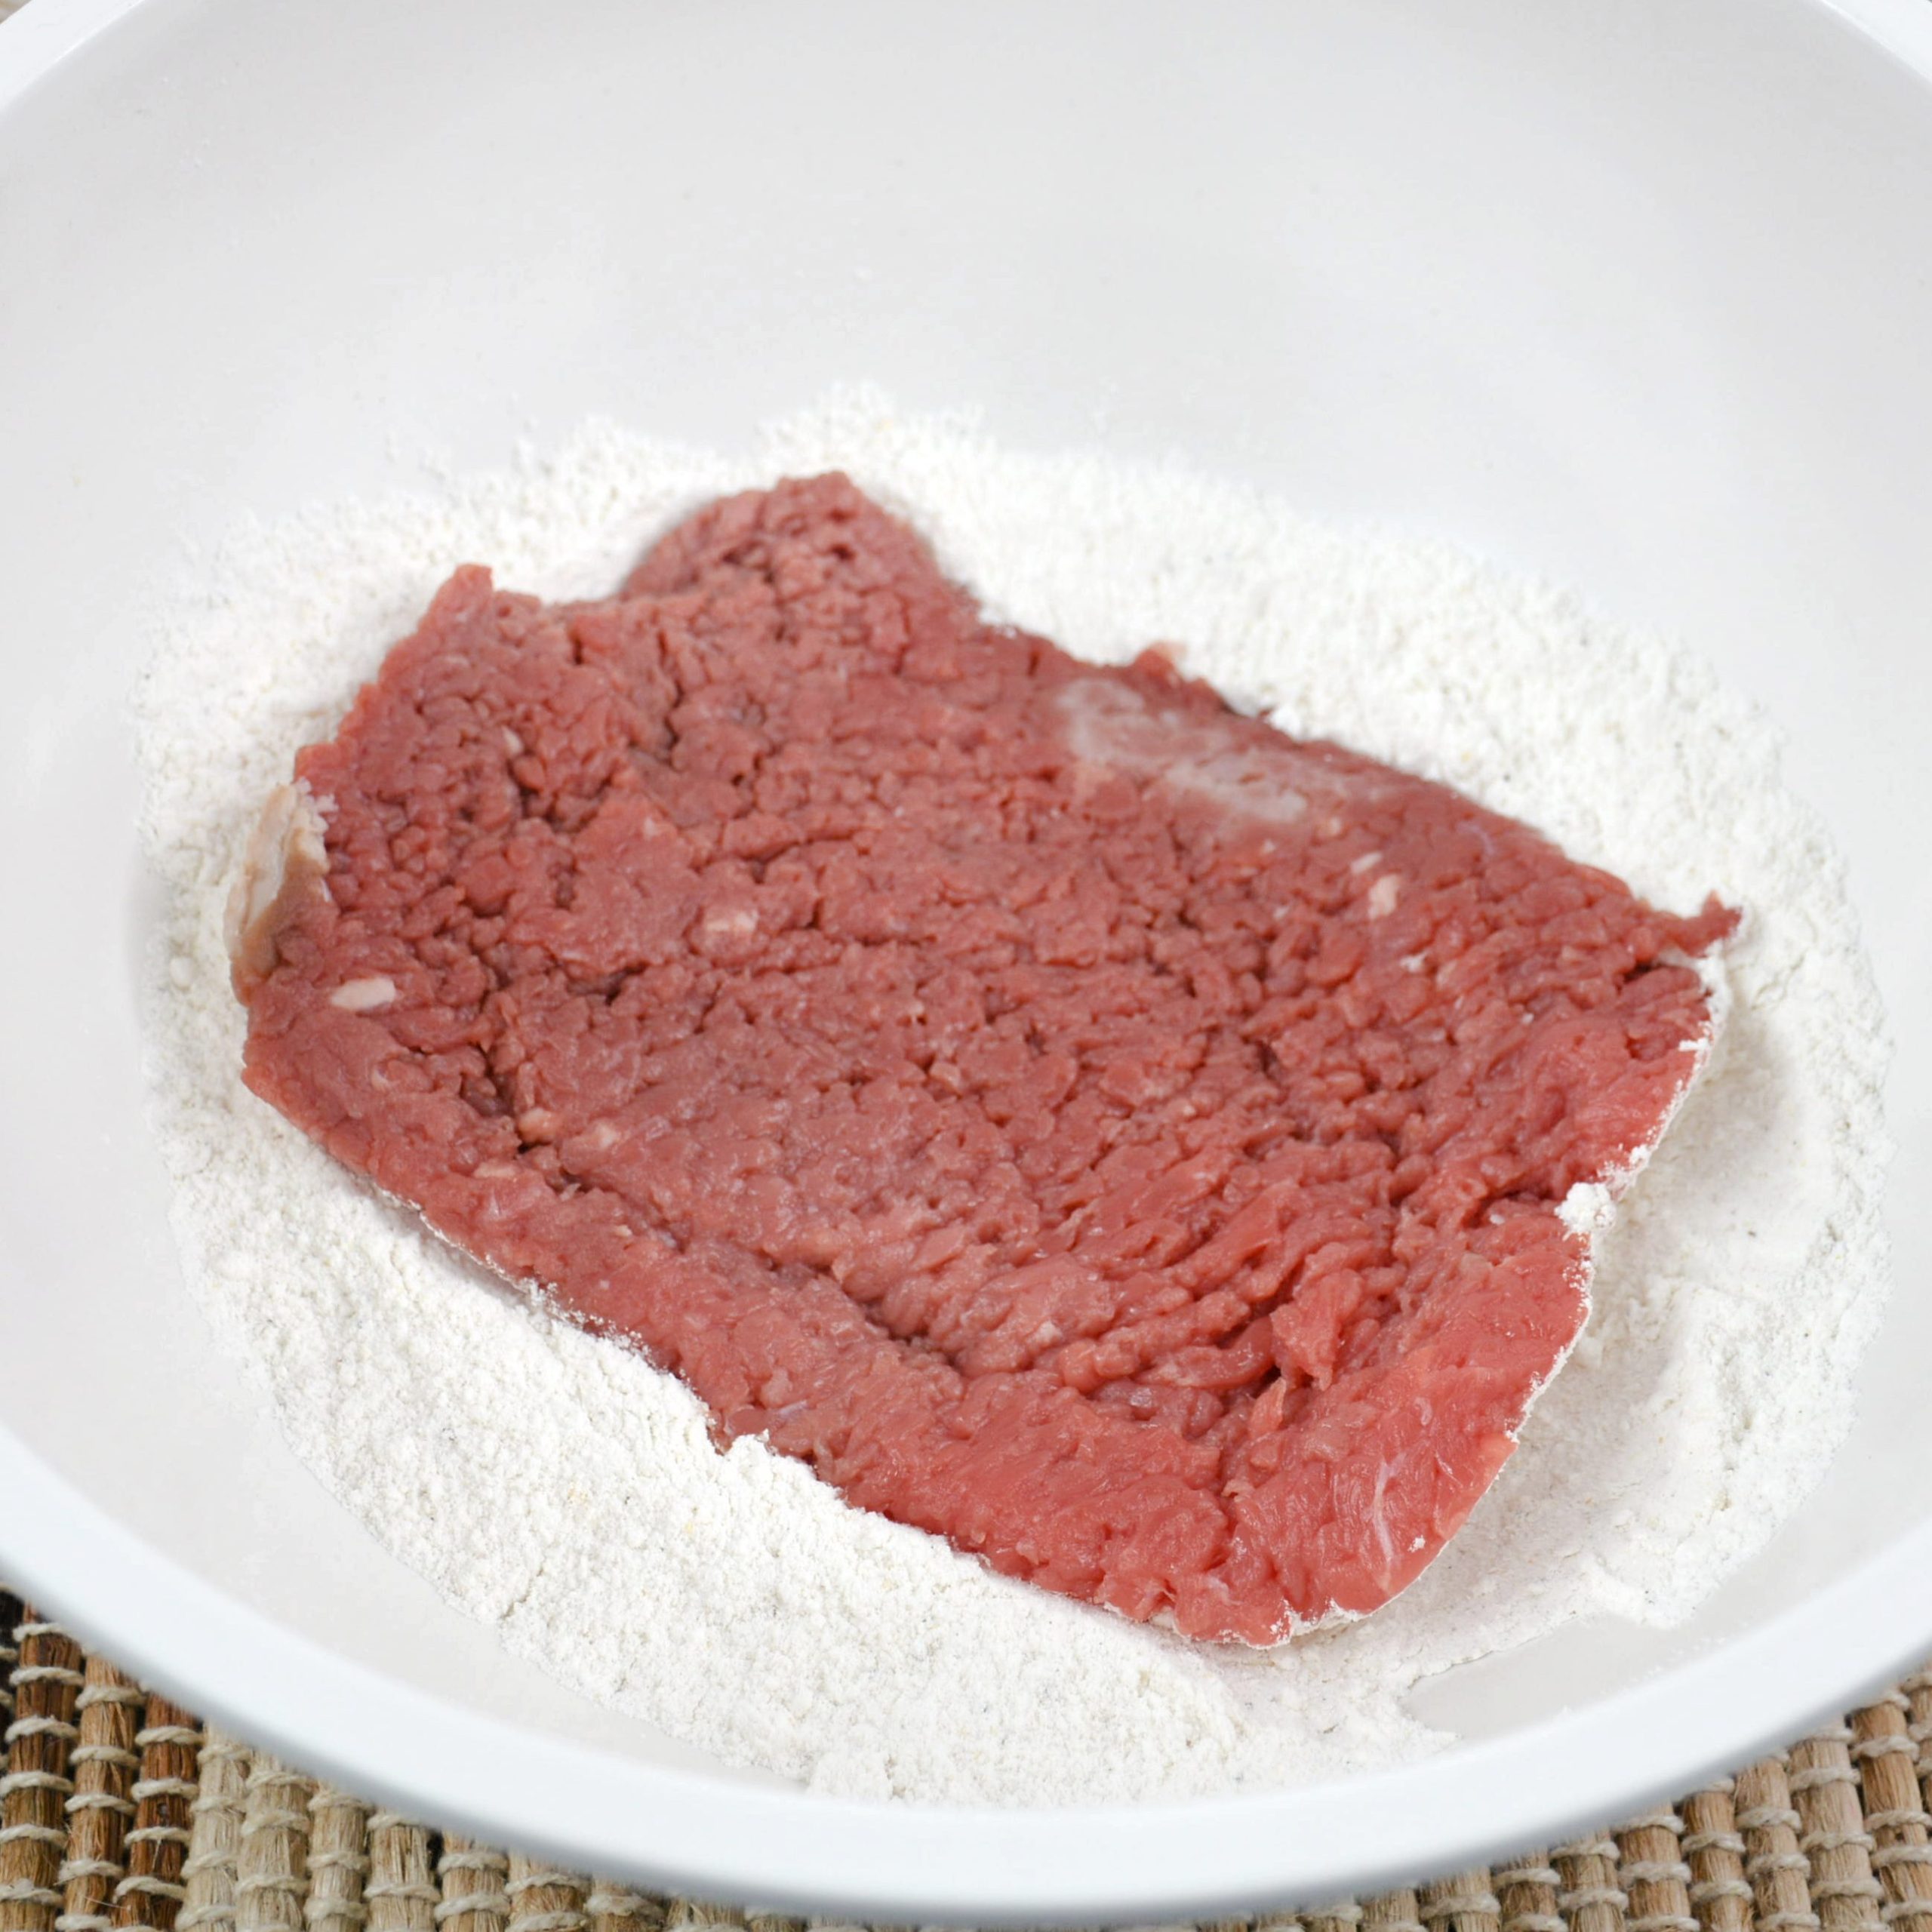 Dredge both sides of cubed steak in a flour mixture.